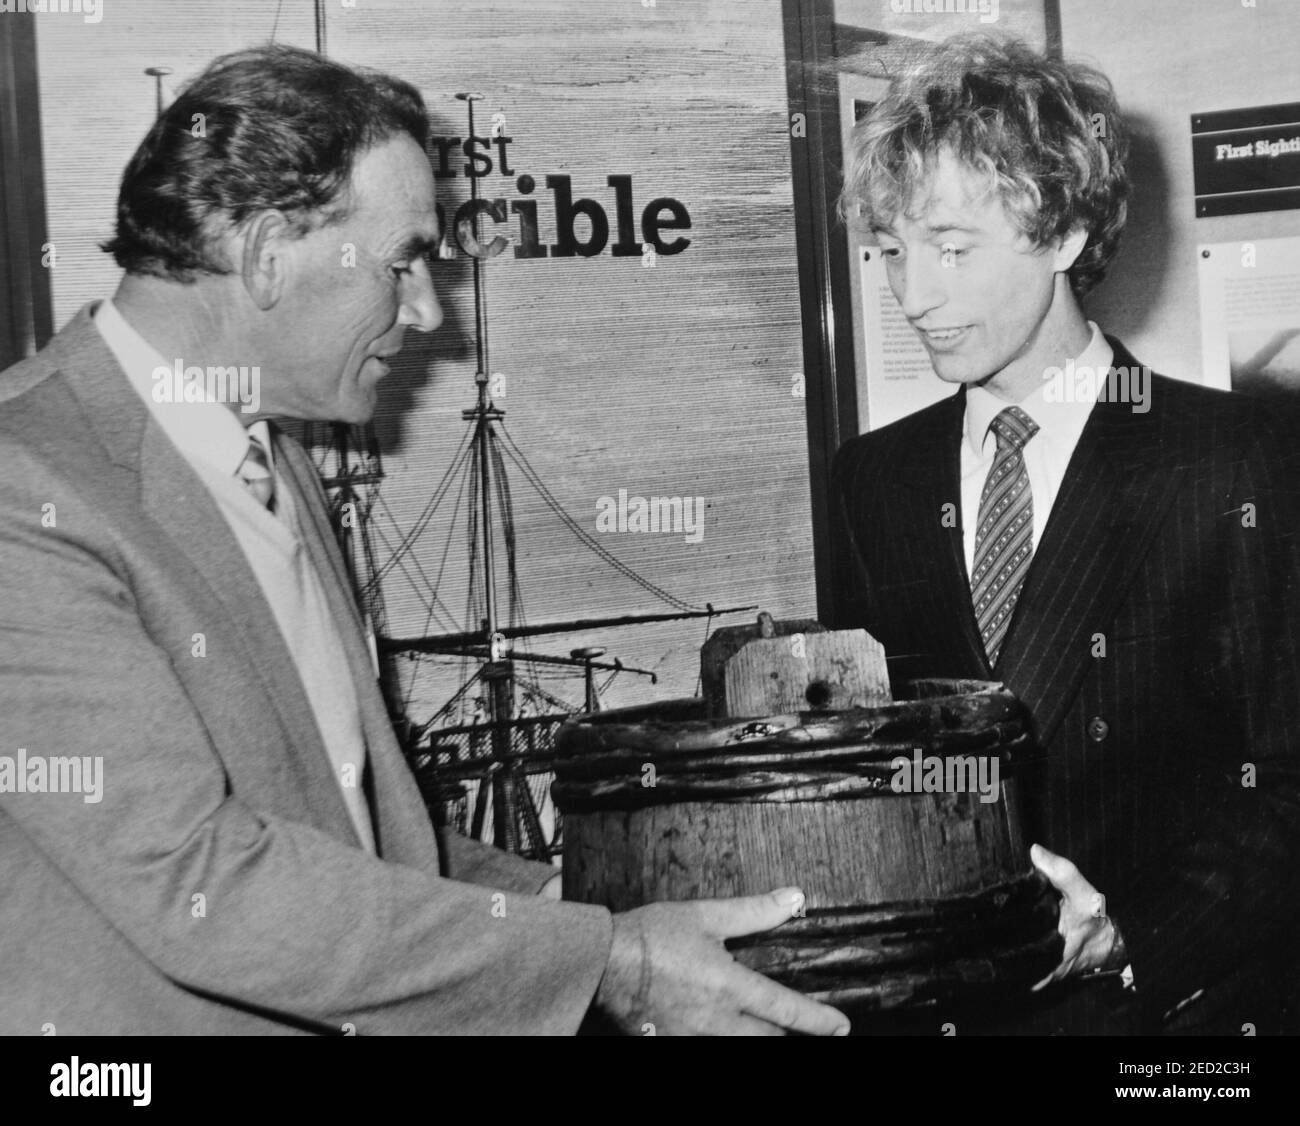 POP STAR ROBIN GIBB OF THE BEE GEES WITH FISHERMAN ARTHUR MACK WHO FOUND THE WRECK OF THE FIRST HMS INVINCIBLE, WHICH SANK IN 1758, LOOK AT A ''SPIT KID'' ONE OF THE RELICS DISCOVERED BY DIVERS OFF PORTSMOUTH, HANTS,1984 Stock Photo